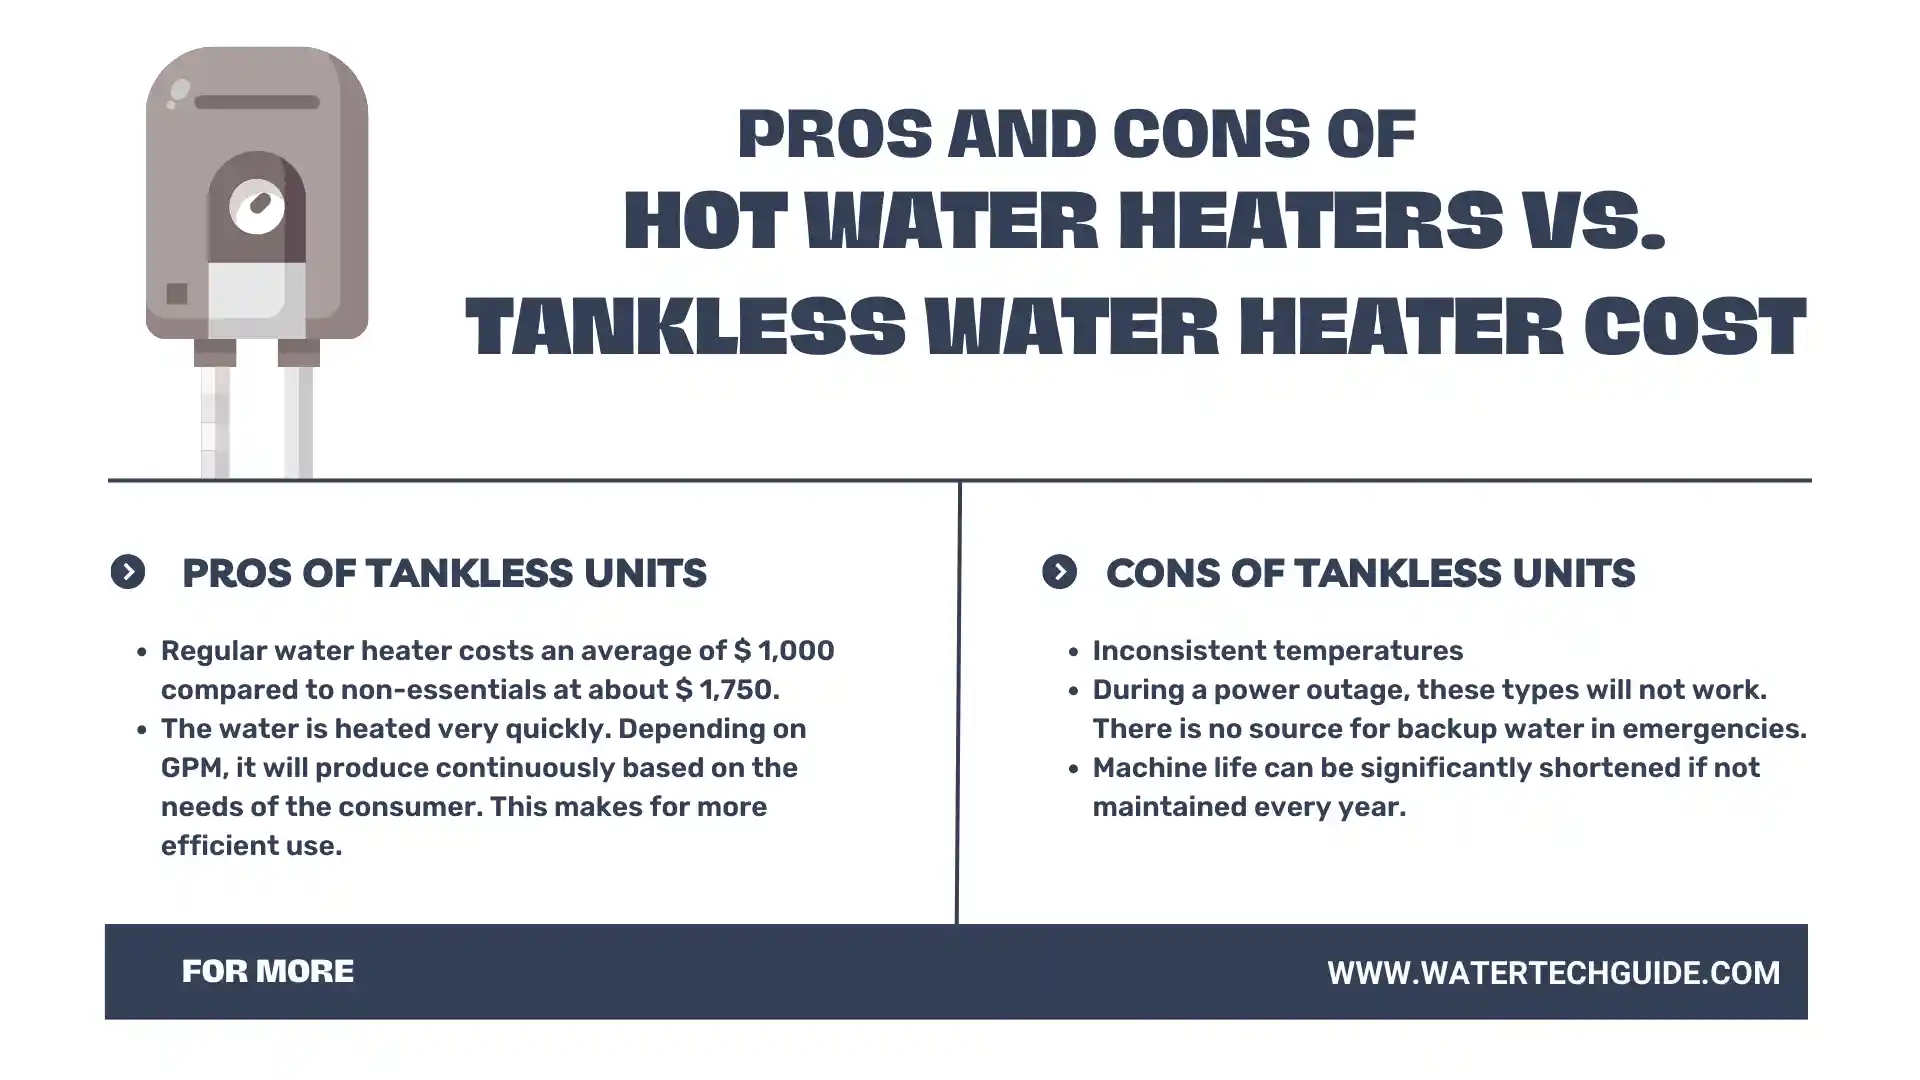 Pros and Cons of Hot Water Heaters vs. Tankless Water Heater Cost